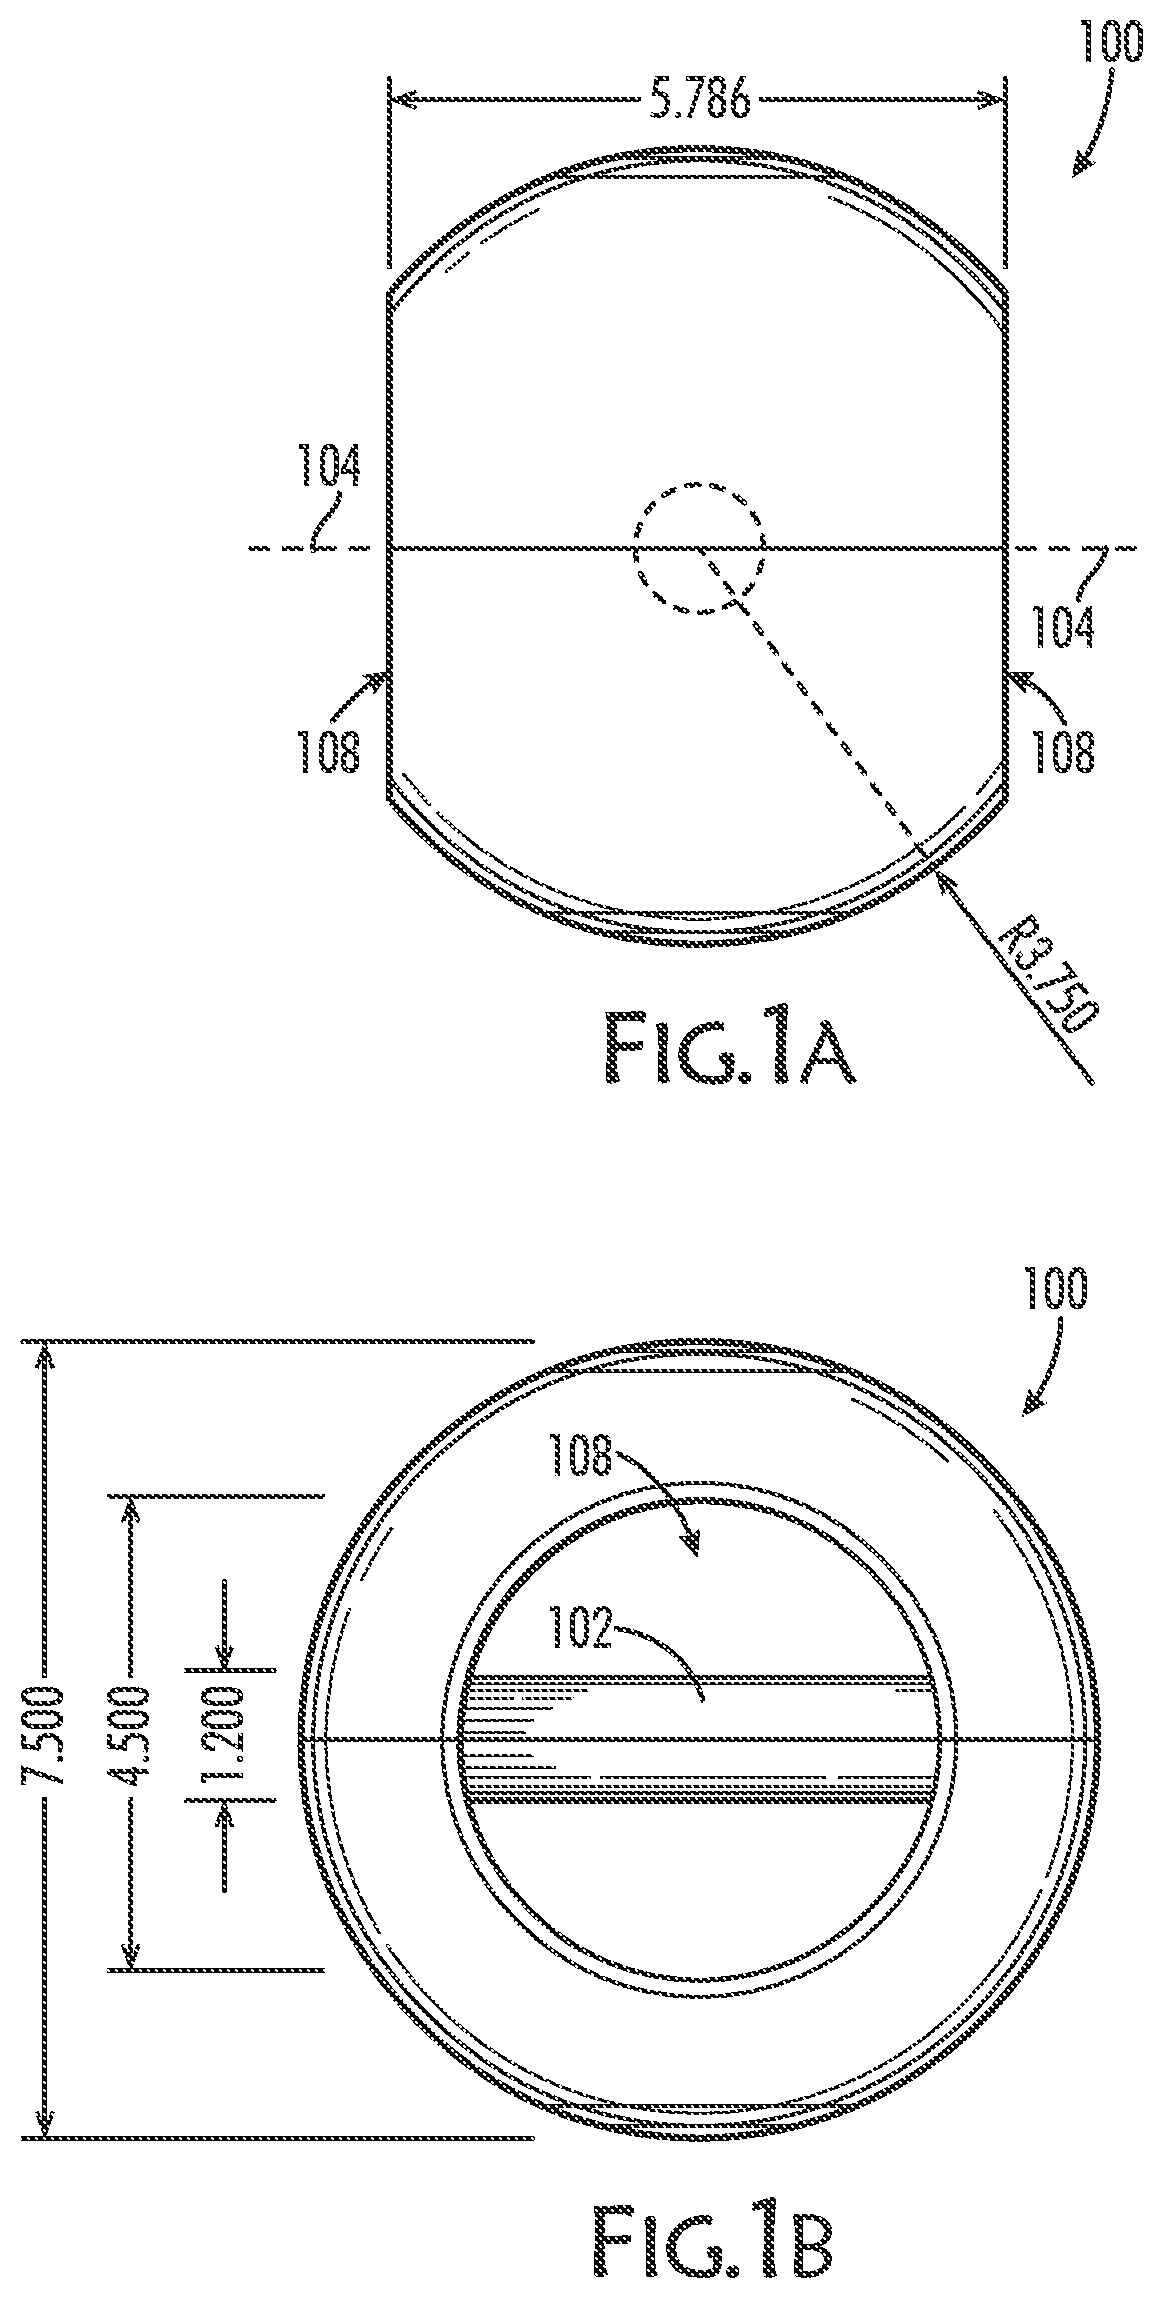 Weight-balanced exercise apparatuses and methods of using same